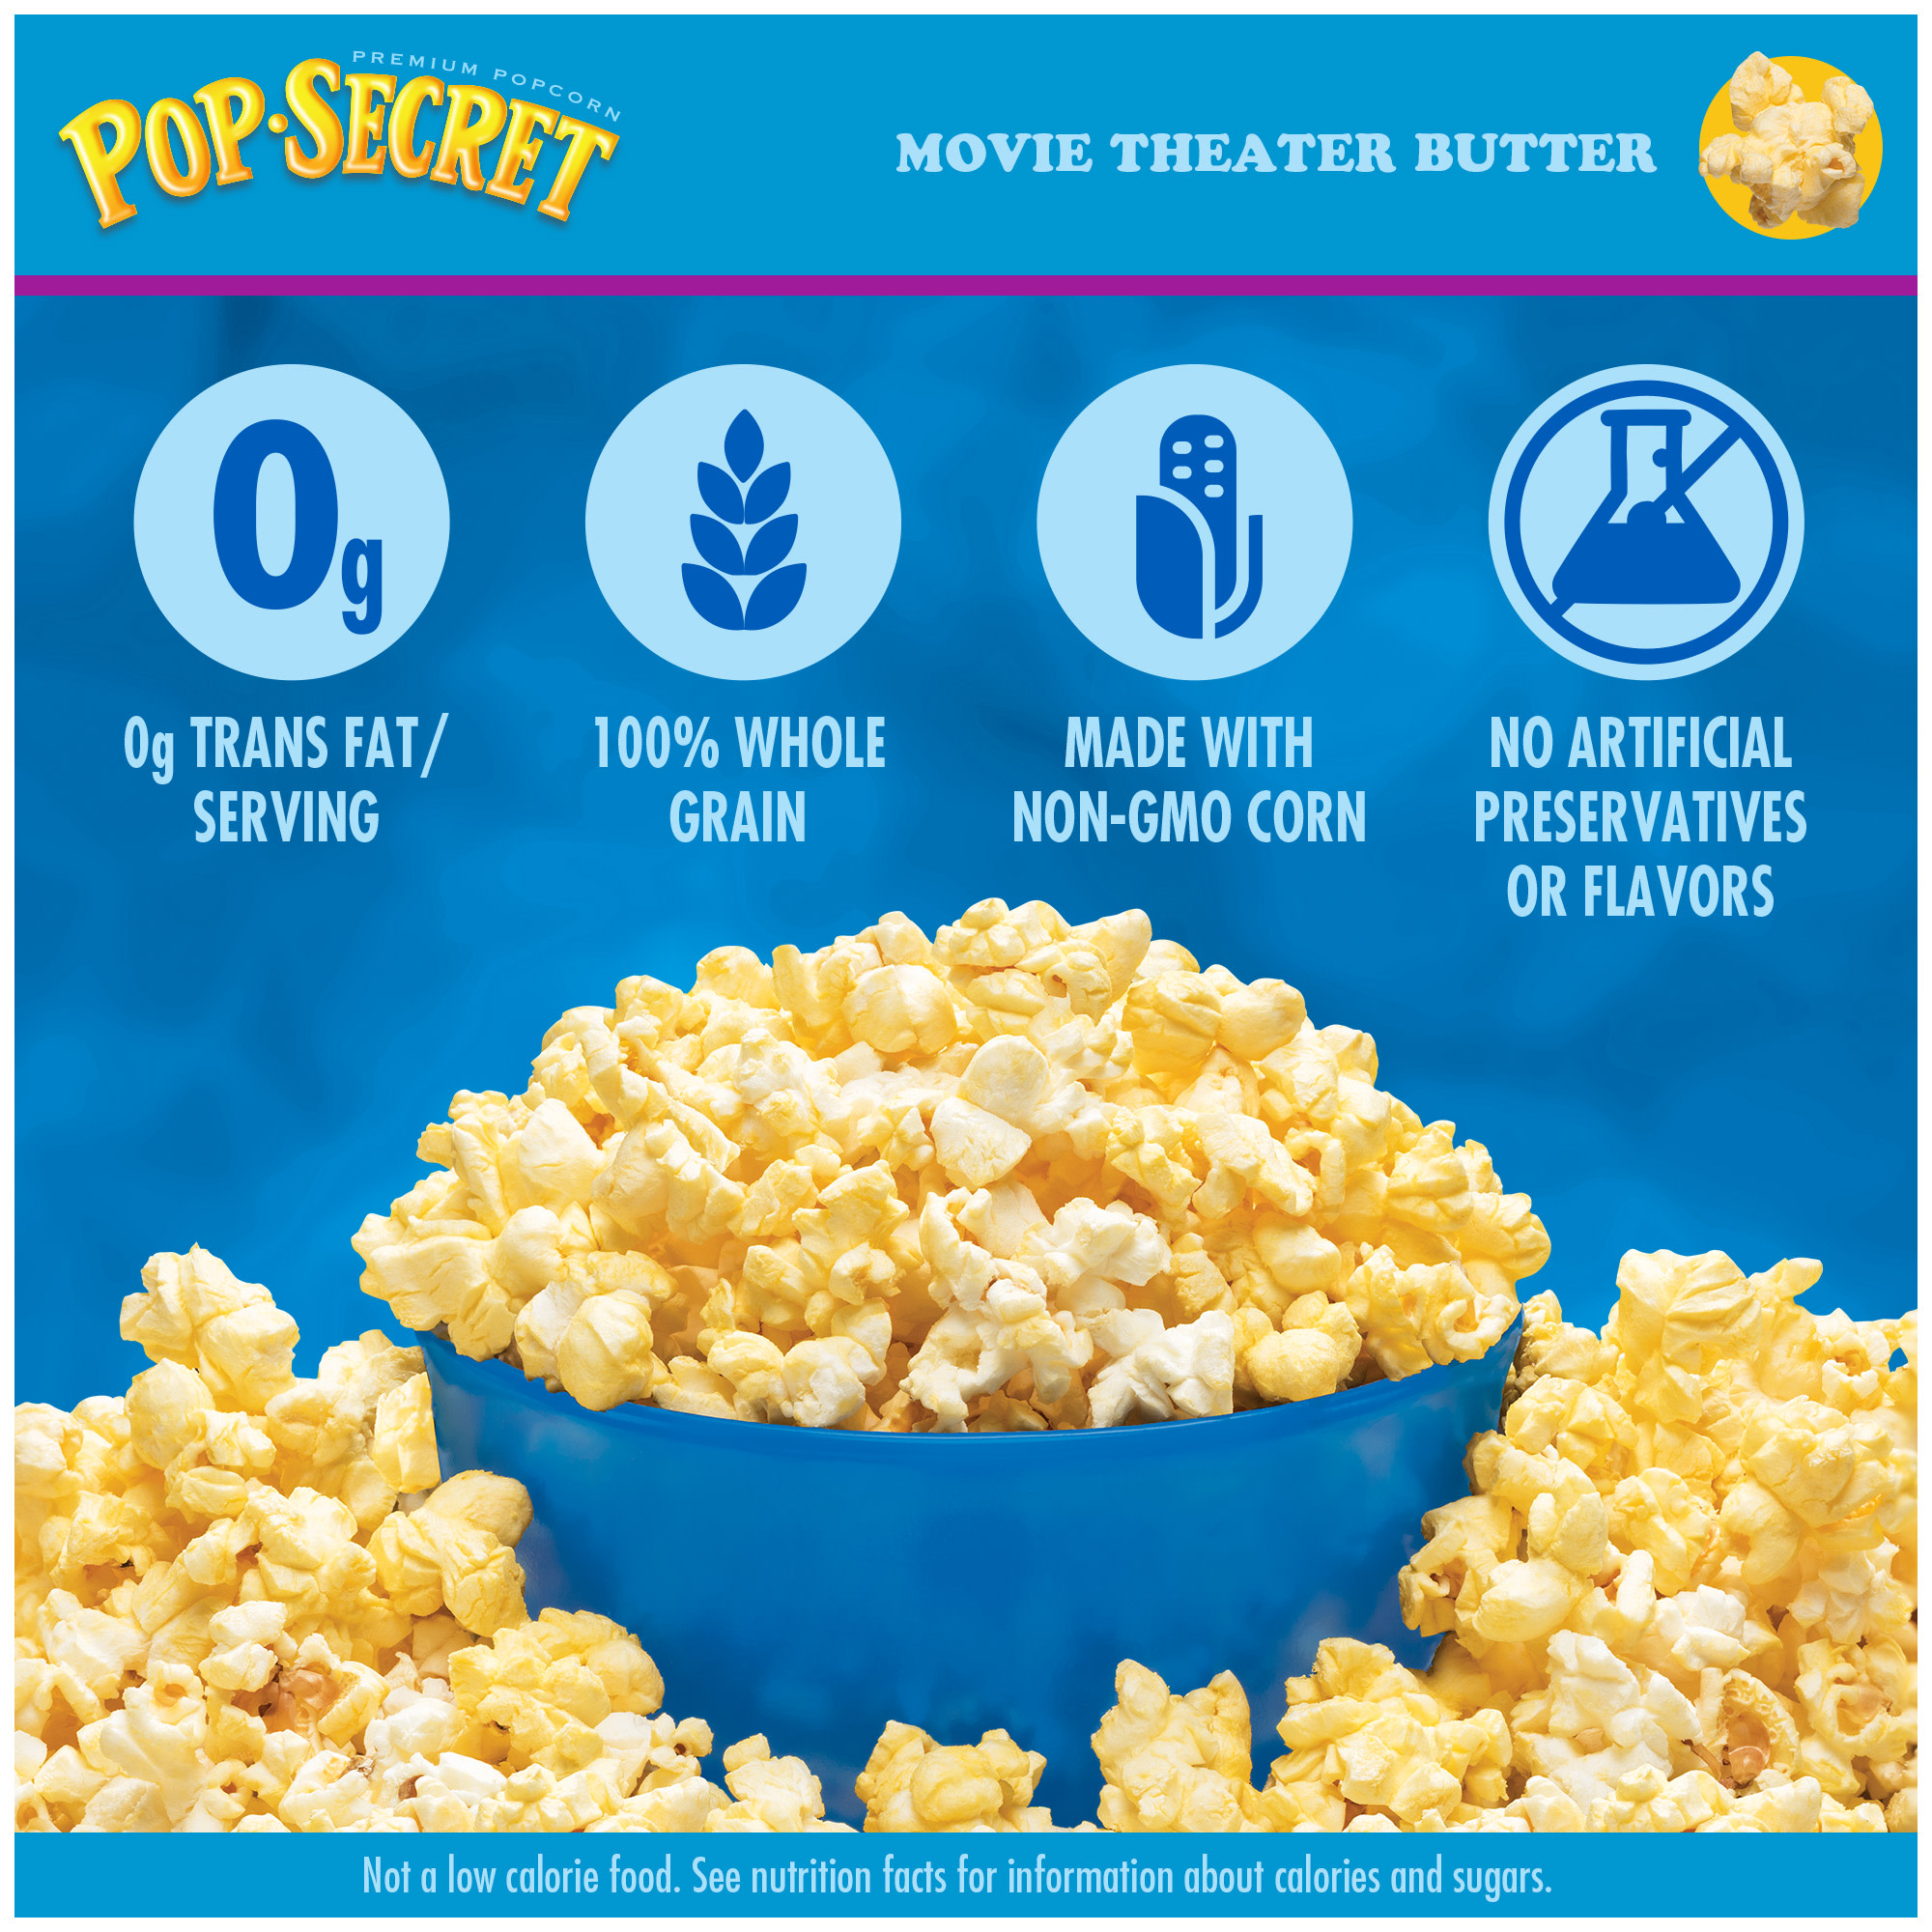 Pop Secret Microwave Popcorn, Movie Theater Butter, Flavor, 3 oz Sharing Bags, 12 Ct - image 2 of 10